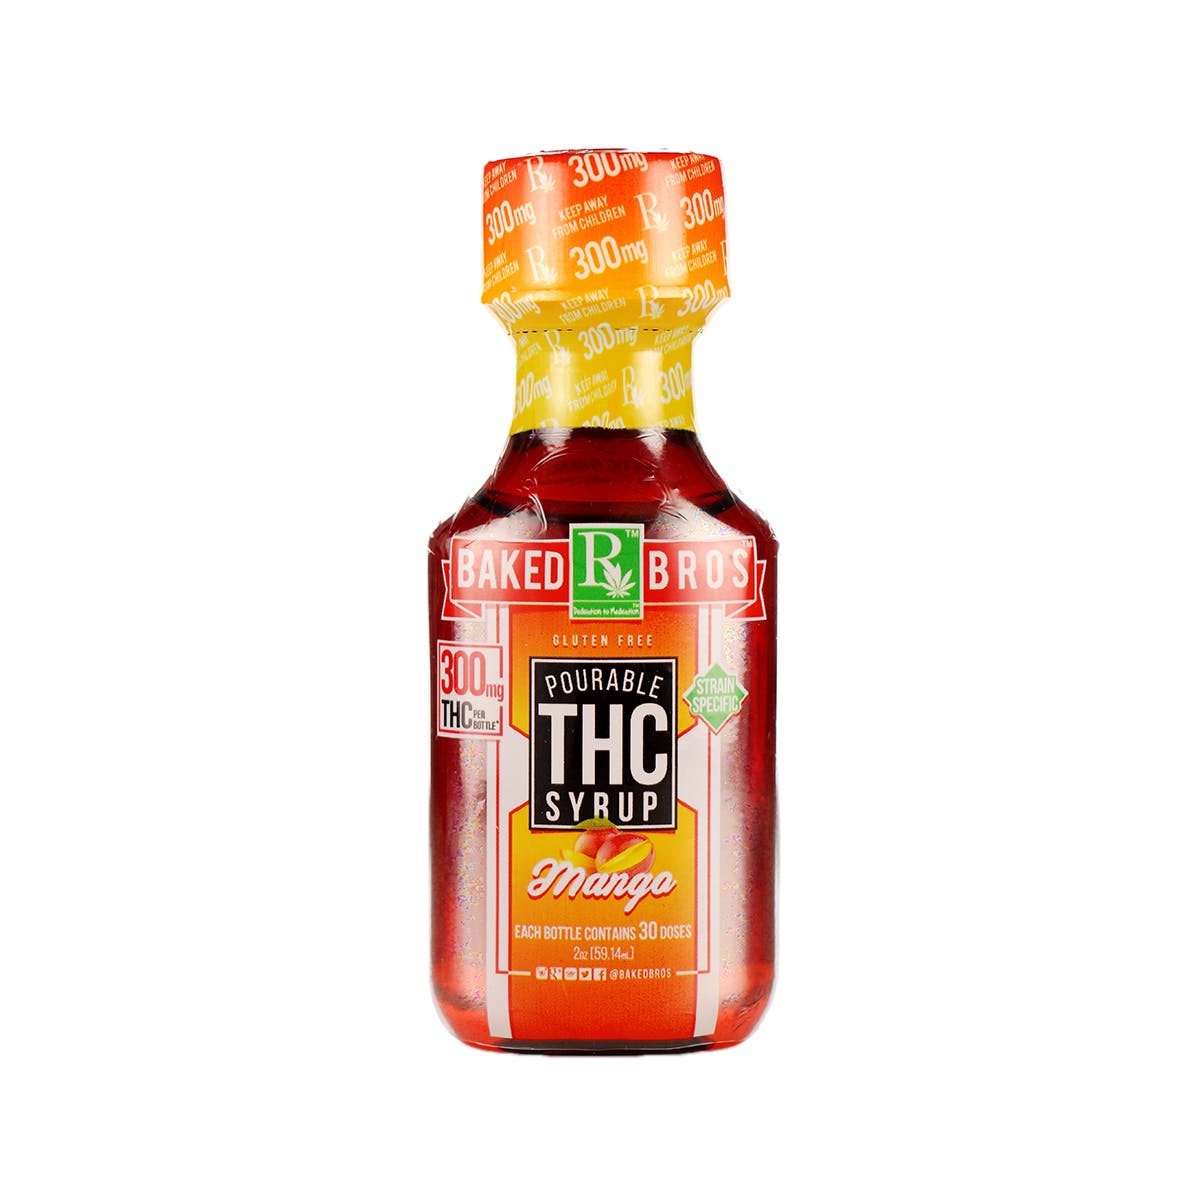 drink-baked-bros-thc-syrup-mango-300mg